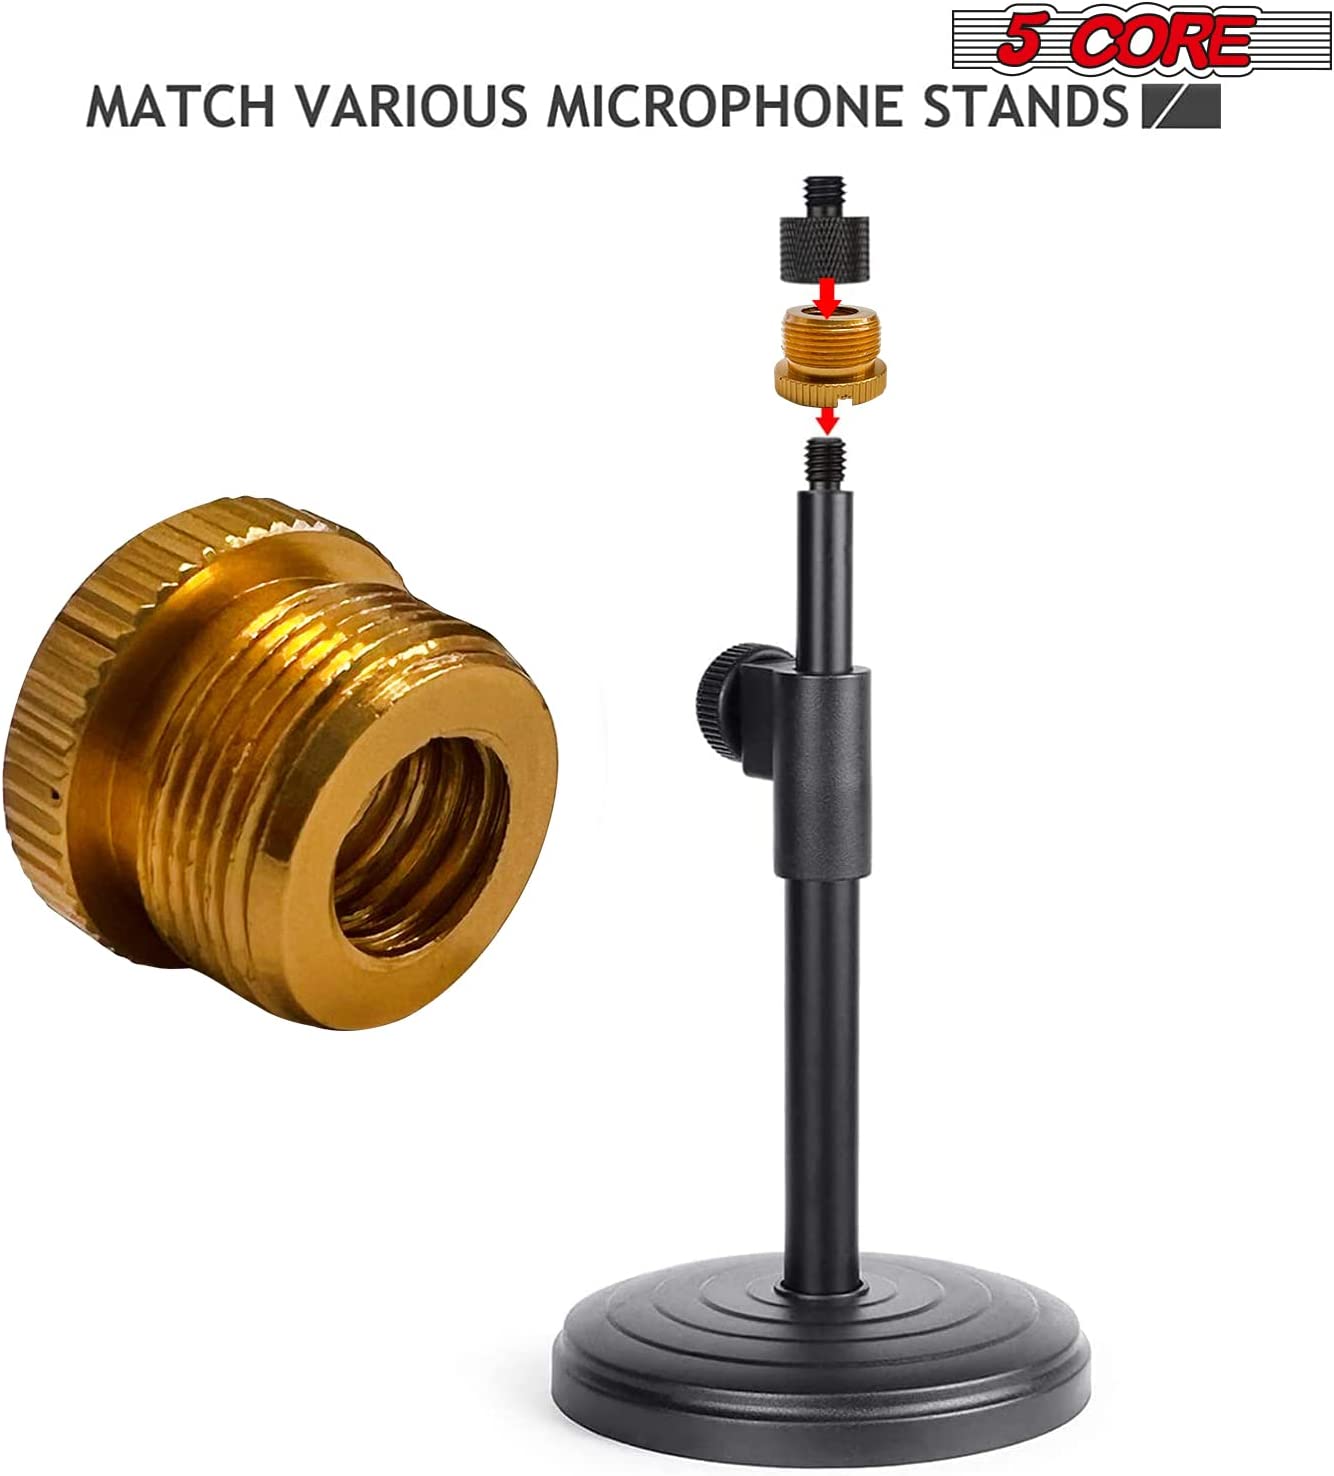 5 Core Mic Stand Adapter 4 Pieces Gold 3/8 Female to 5/8 Male Aluminum Mic Screw Adapter Gold Microphone Tripod Stand Screw - MS ADP M GLD 4PCS-8